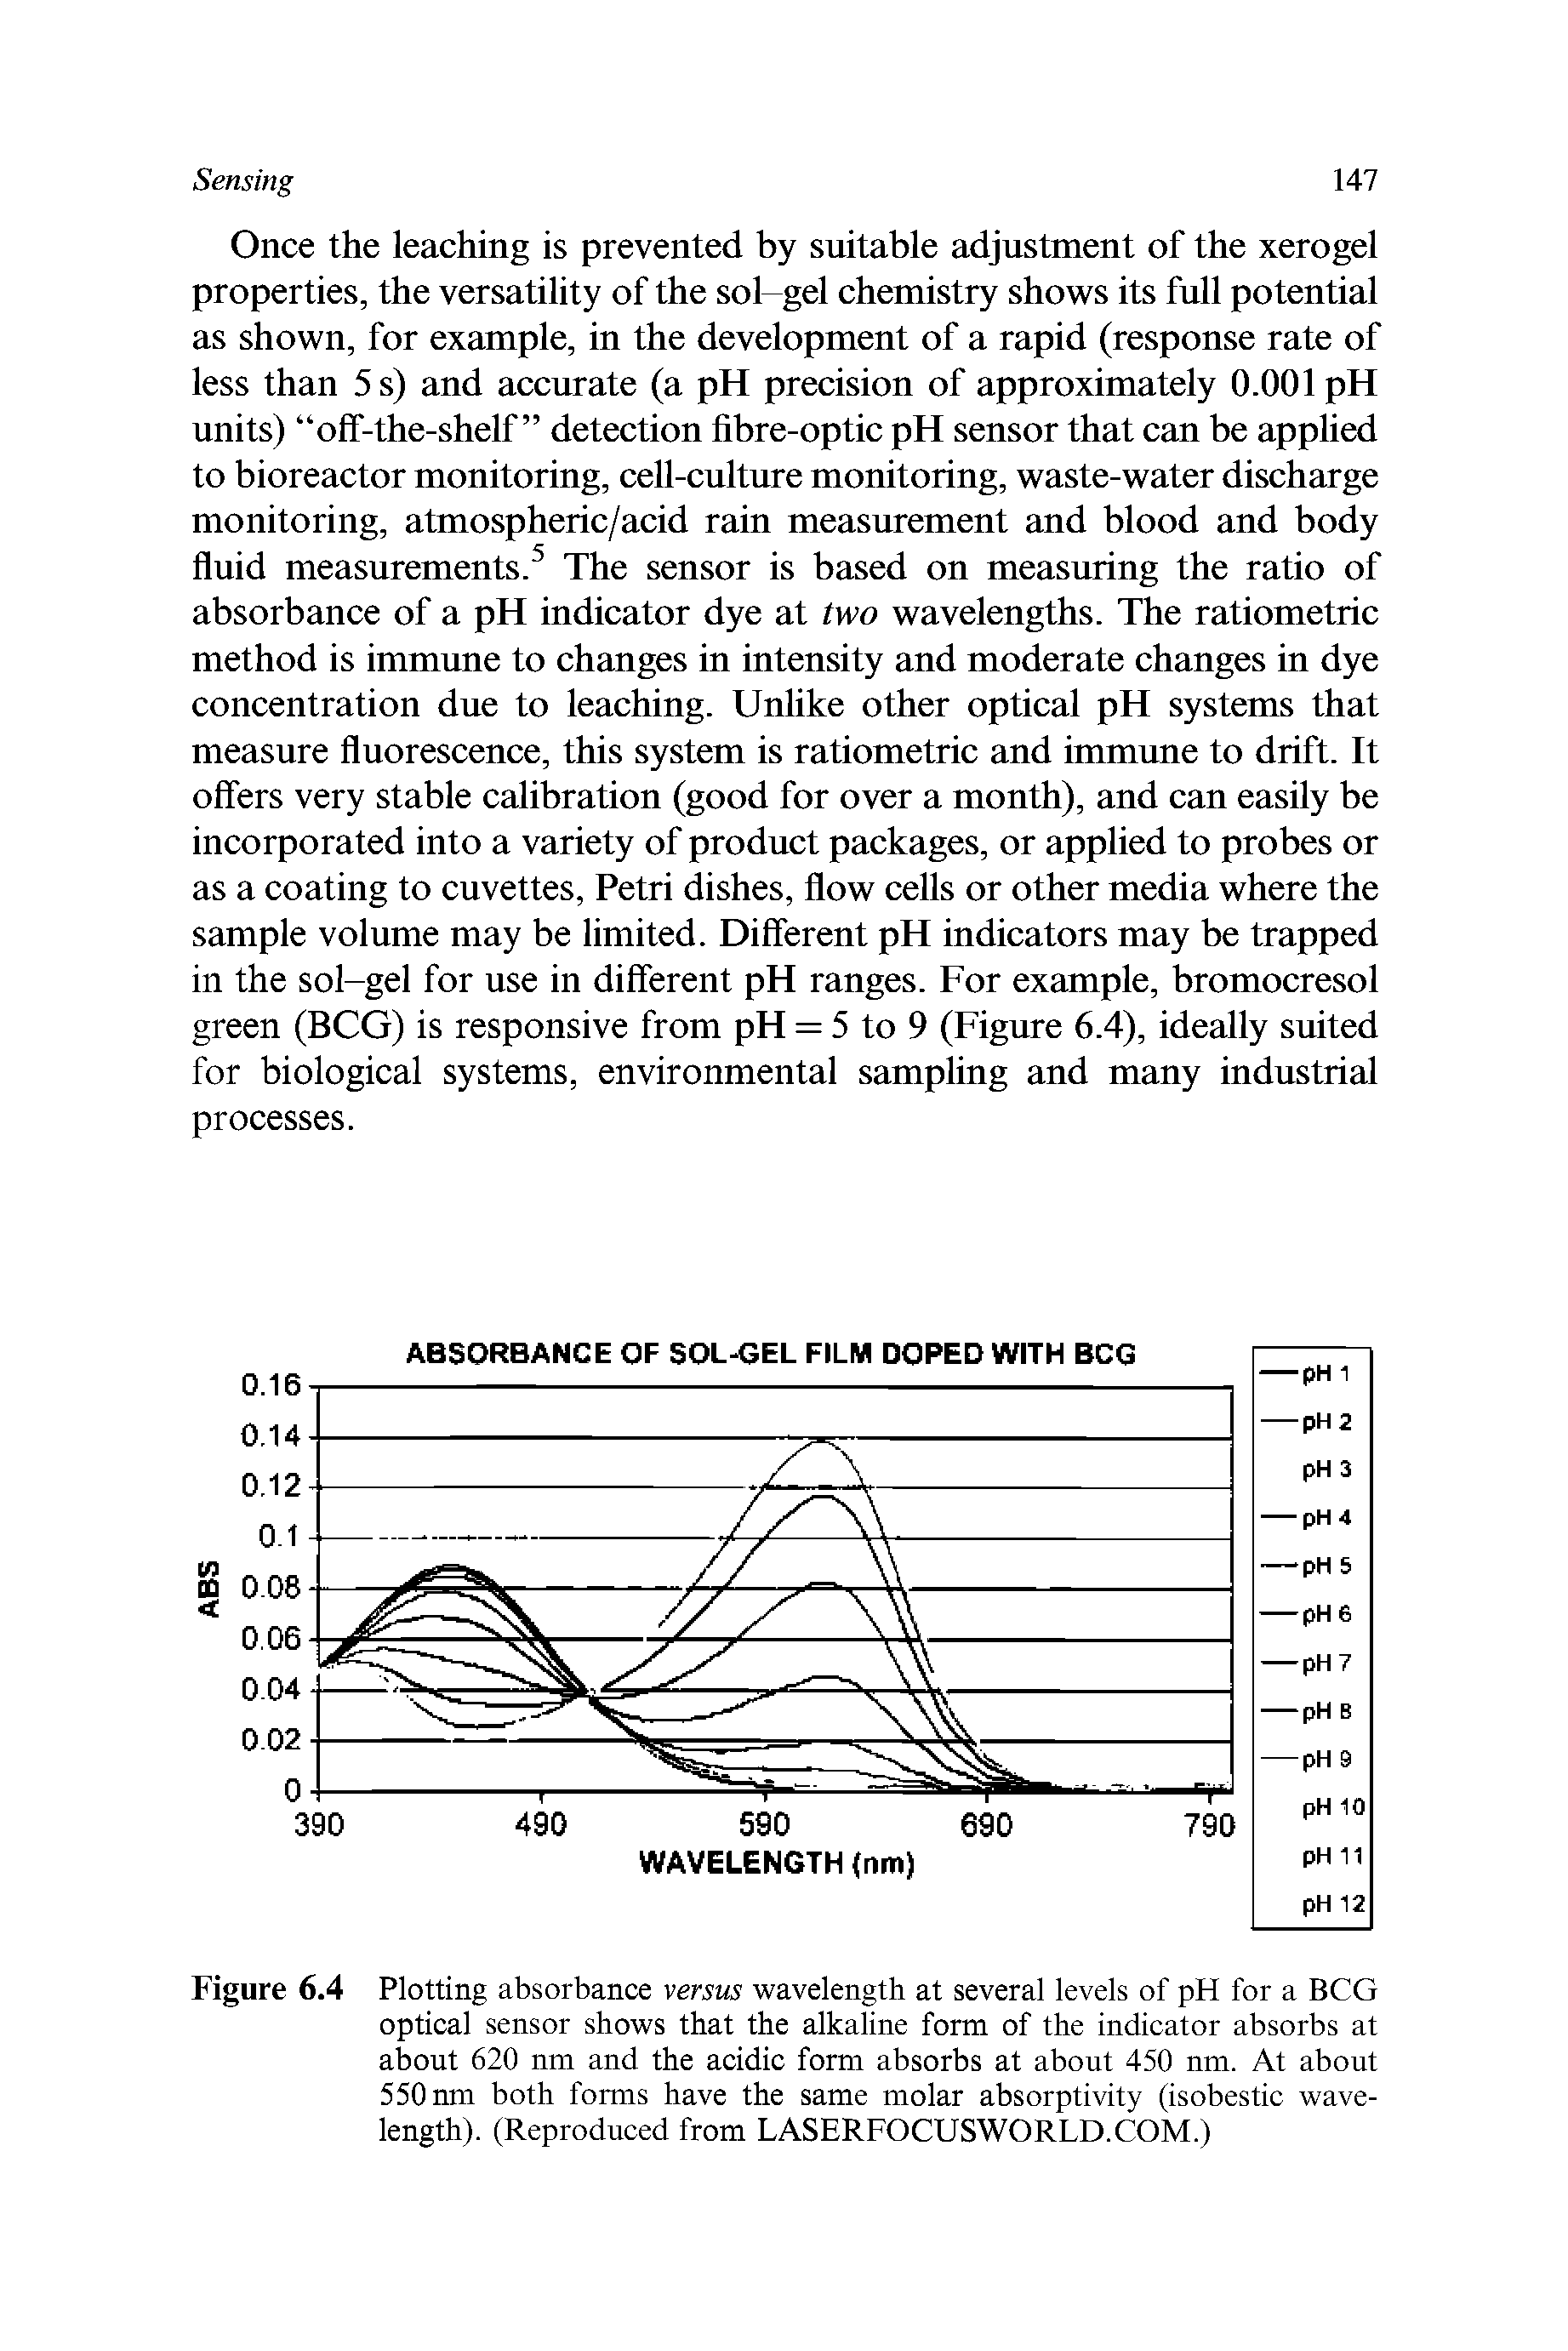 Figure 6.4 Plotting absorbance versus wavelength at several levels of pH for a BCG optical sensor shows that the alkaline form of the indicator absorbs at about 620 nm and the acidic form absorbs at about 450 nm. At about 550 nm both forms have the same molar absorptivity (isobestic wavelength). (Reproduced from LASERFOCUSWORLD.COM.)...